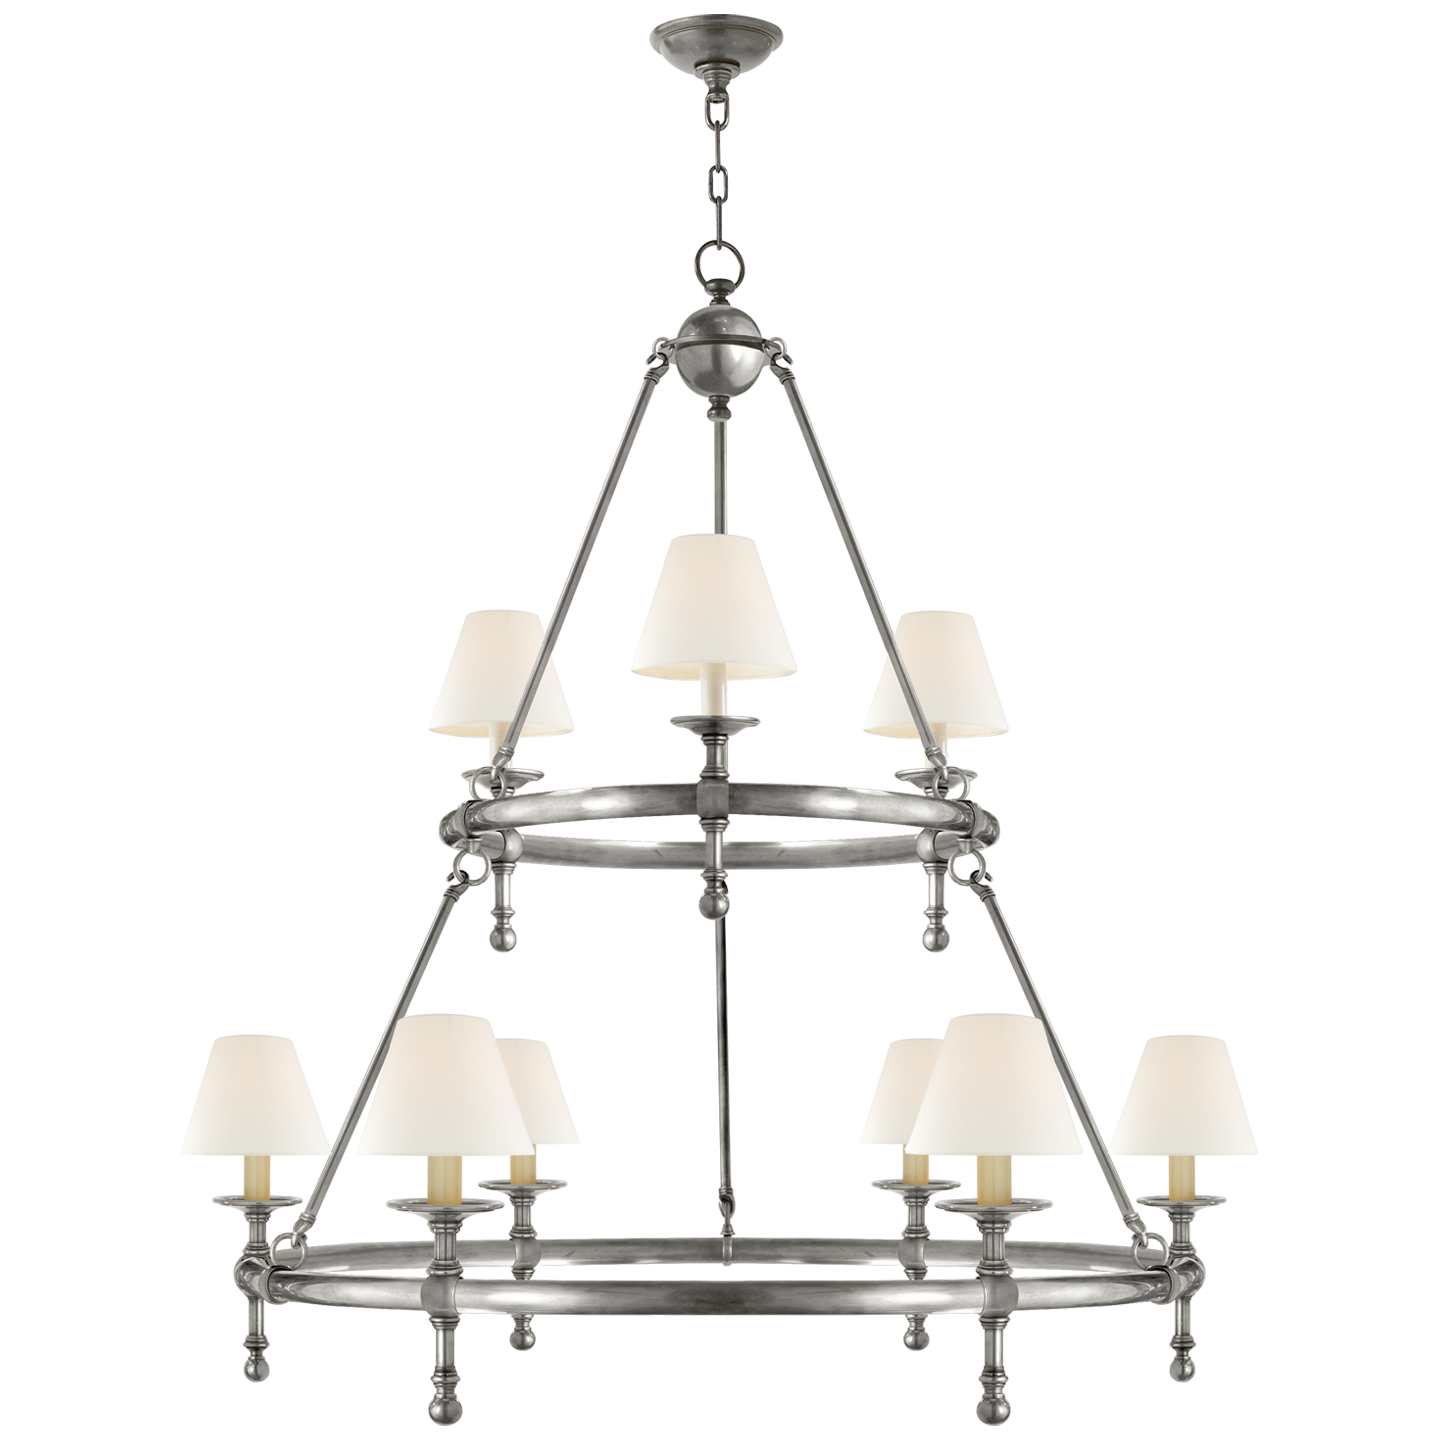 Classic Two-Tier Ring Chandelier – Laura Kincade